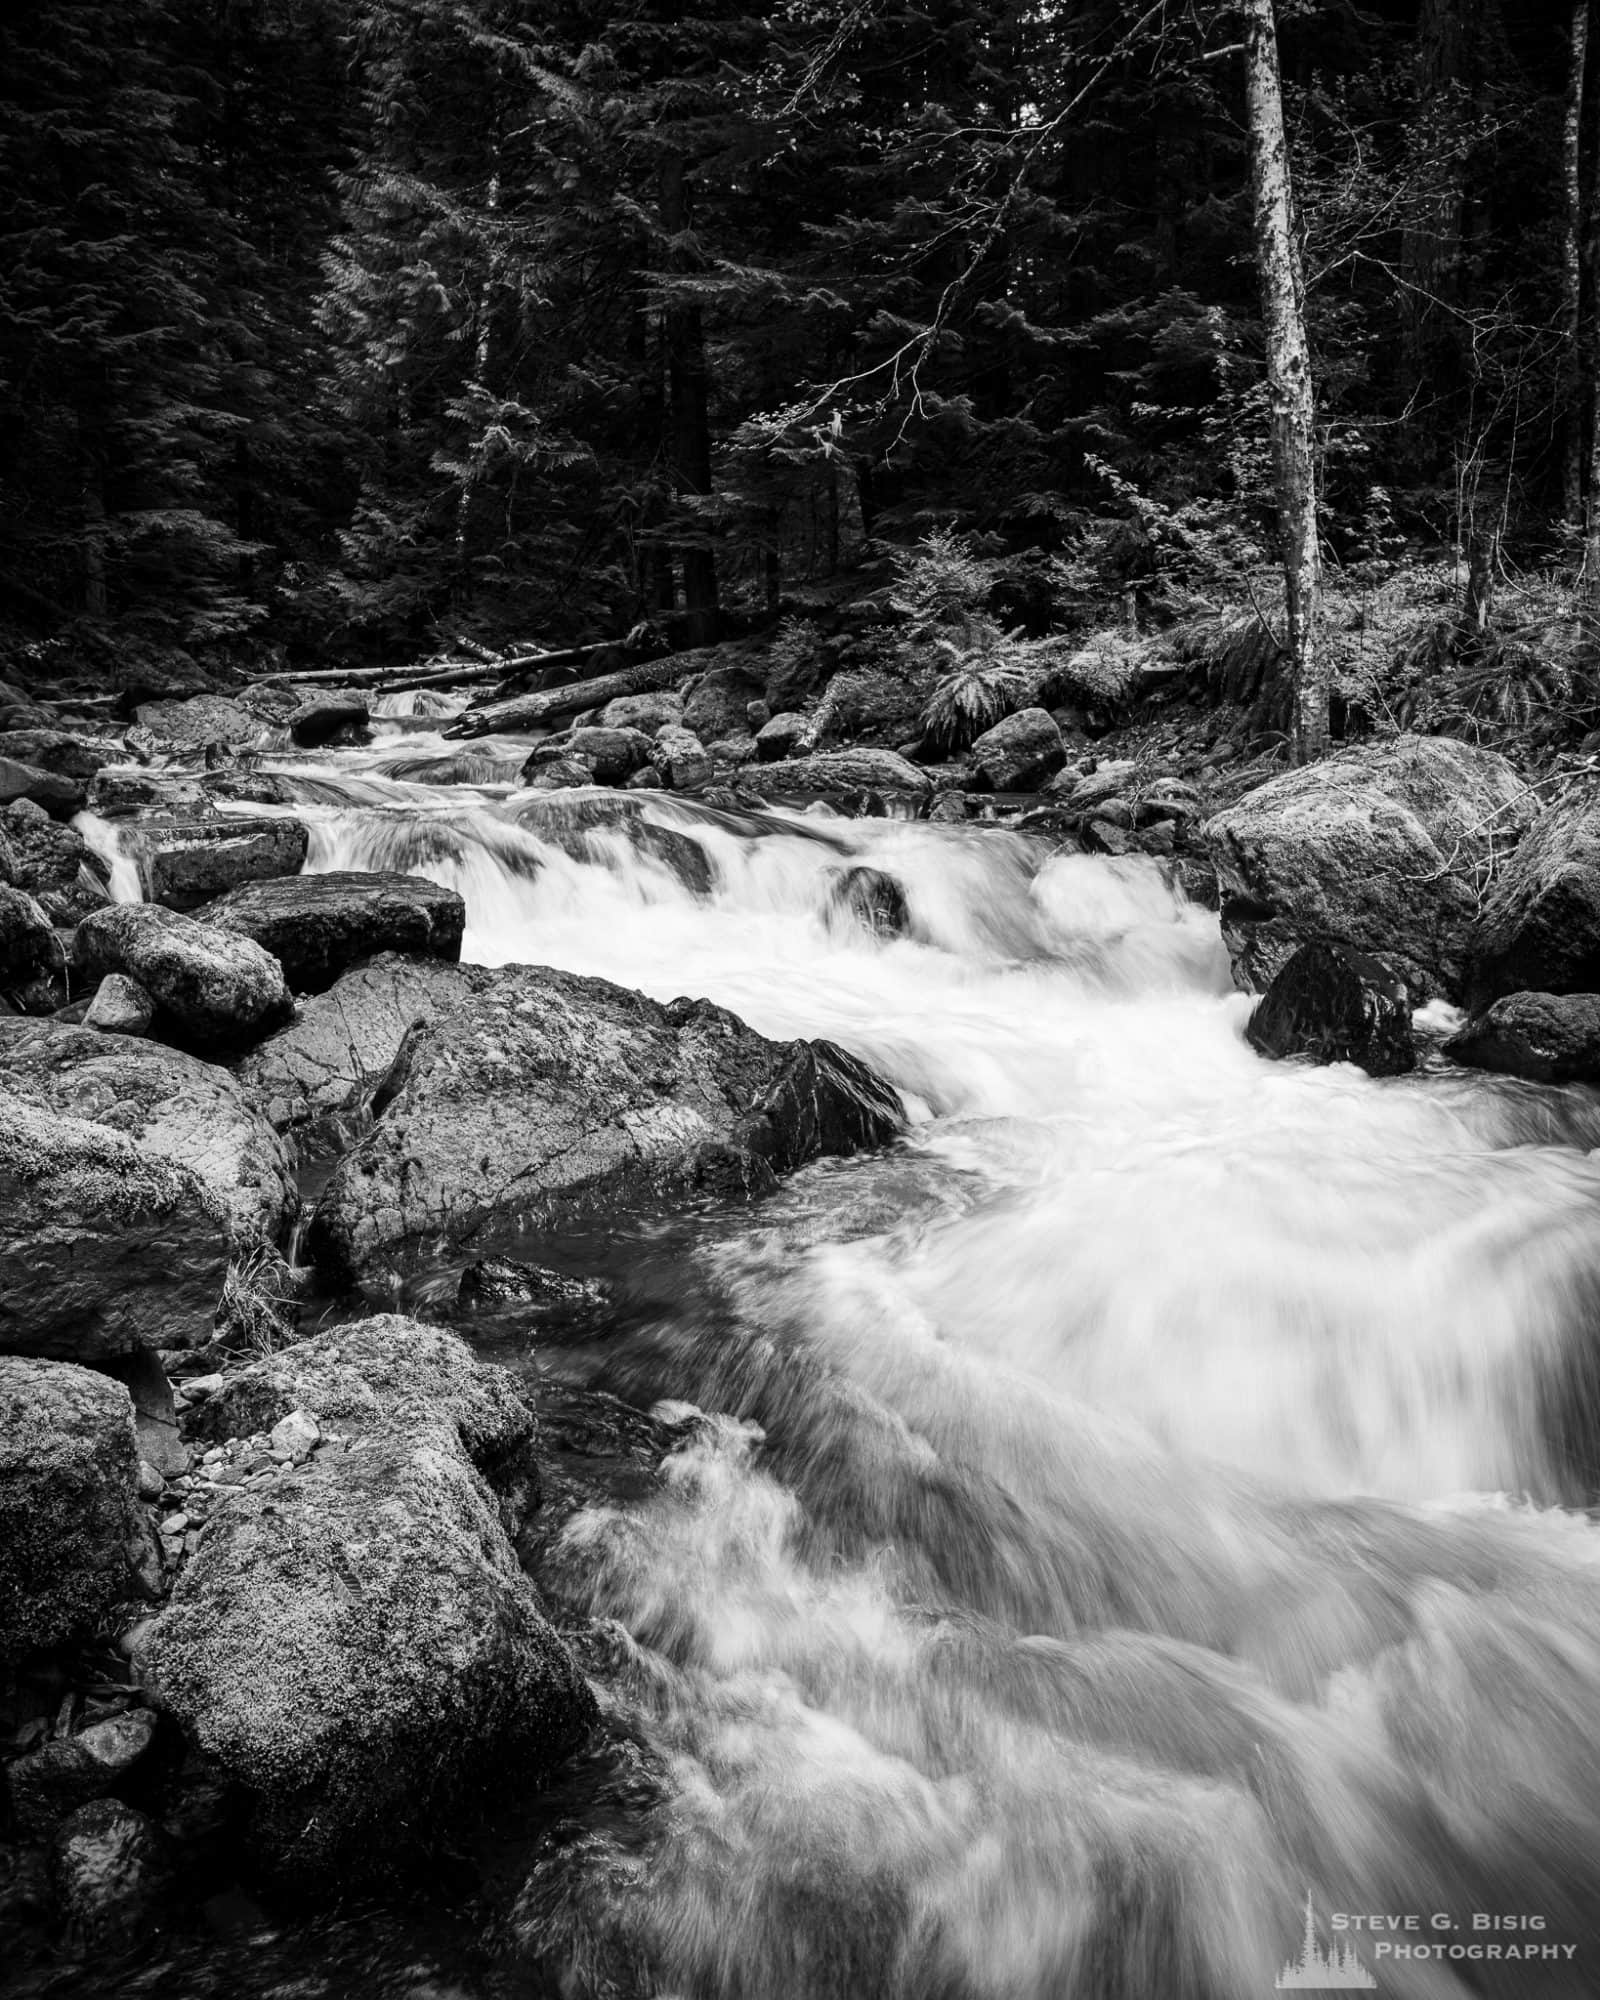 A black and white landscape photograph of a mountain stream found along Forest Road 52 (Skate Creek Road) in the Gifford Pinchot National Forest, Washington.